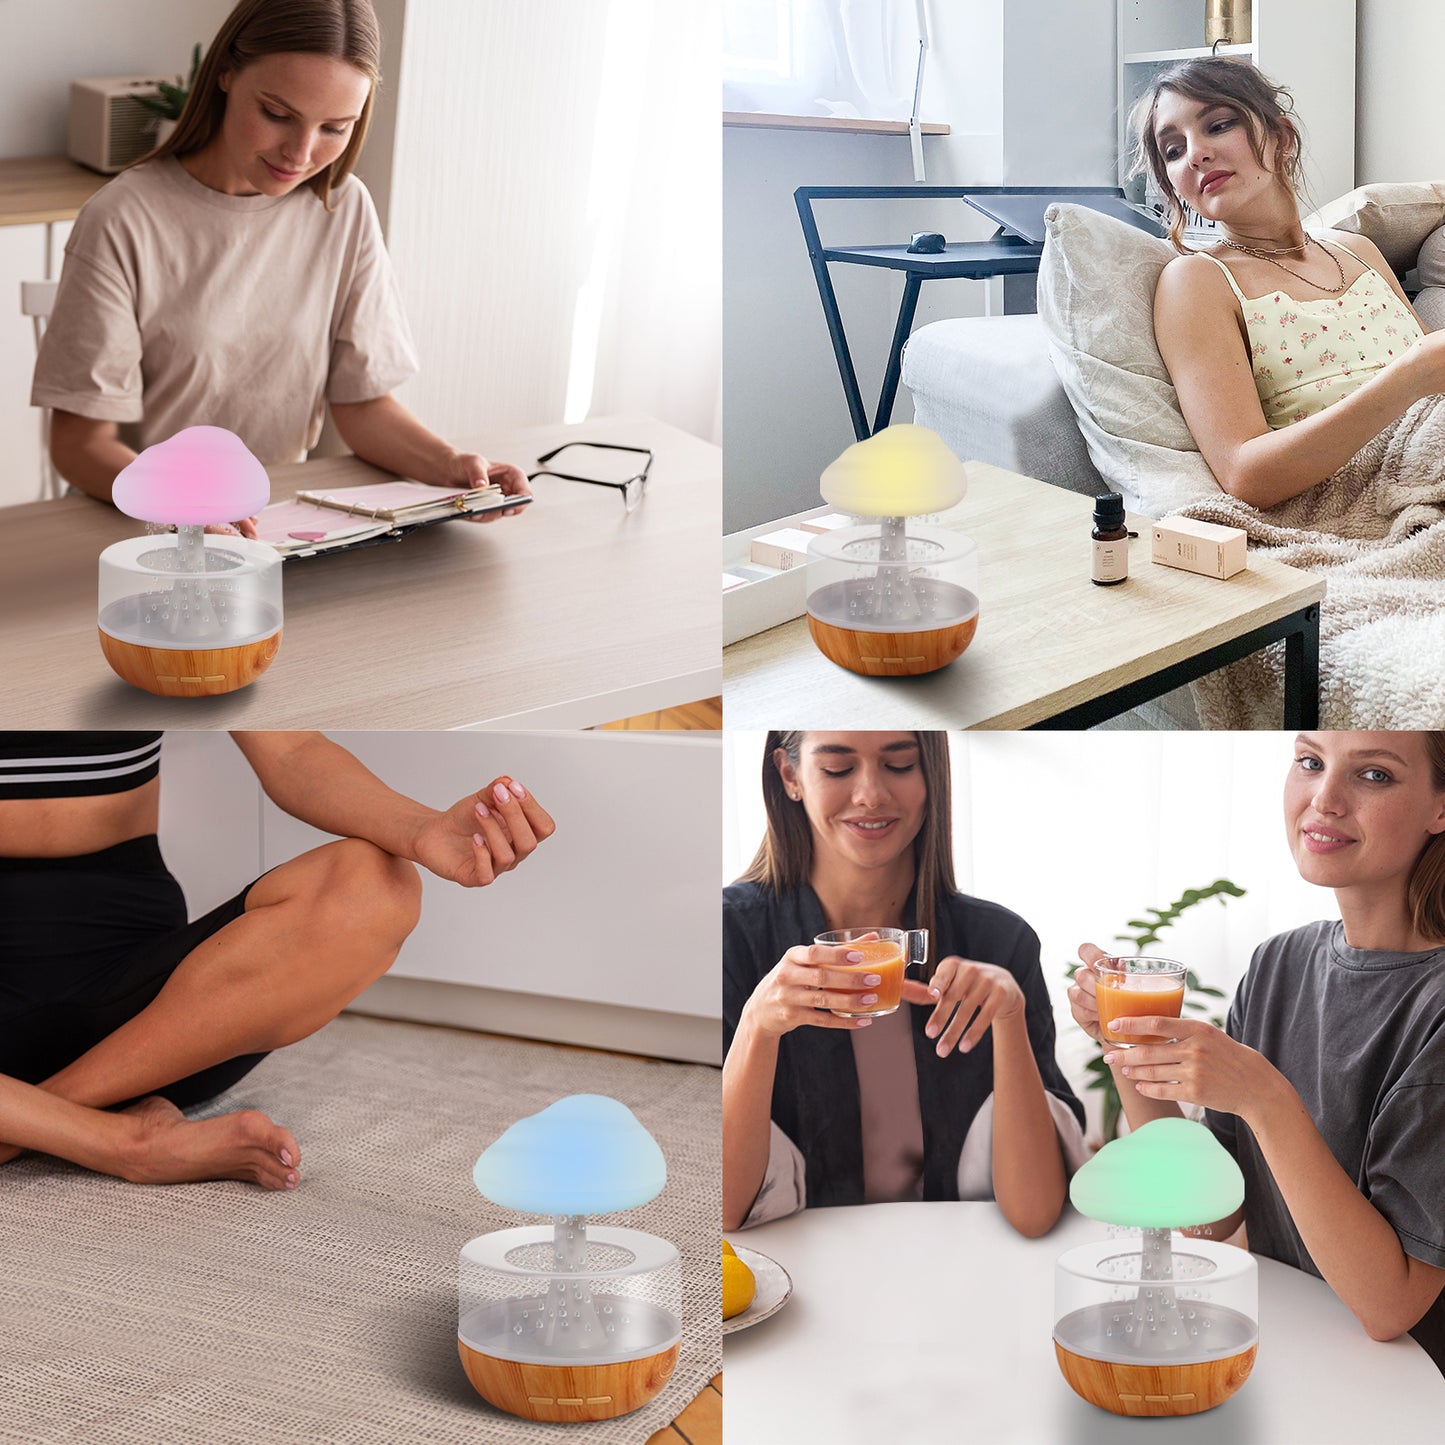 Raining Cloud Humidifier With Night Light Aromatherapy Essential Oil Diffuser Micro Humidifier Relaxing Mood Water Drop Sound For Home